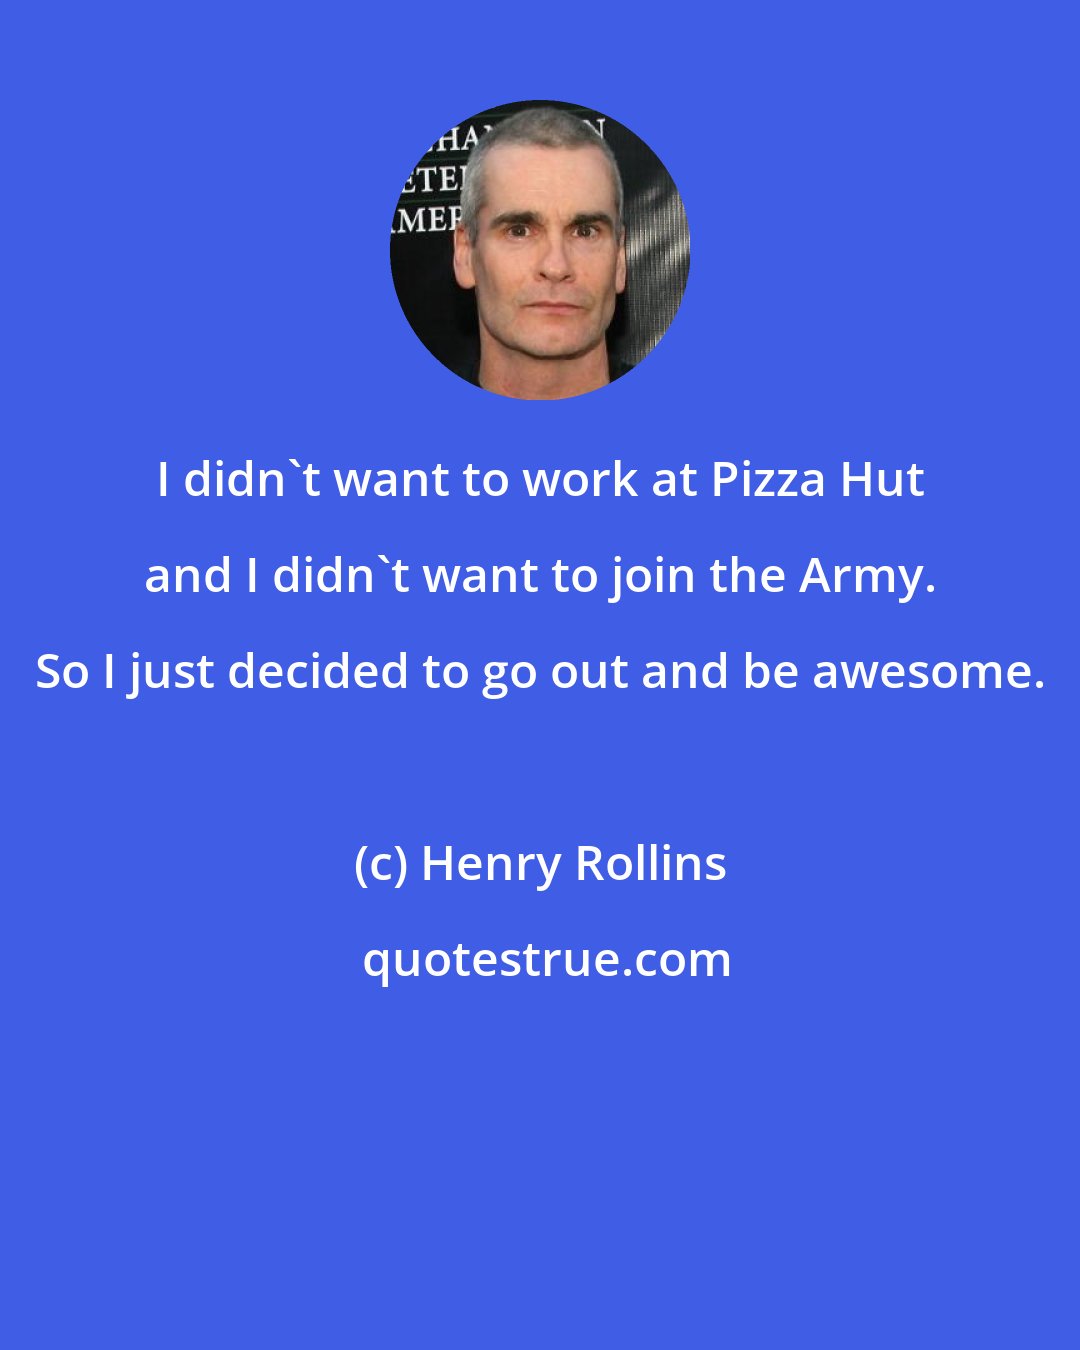 Henry Rollins: I didn't want to work at Pizza Hut and I didn't want to join the Army. So I just decided to go out and be awesome.